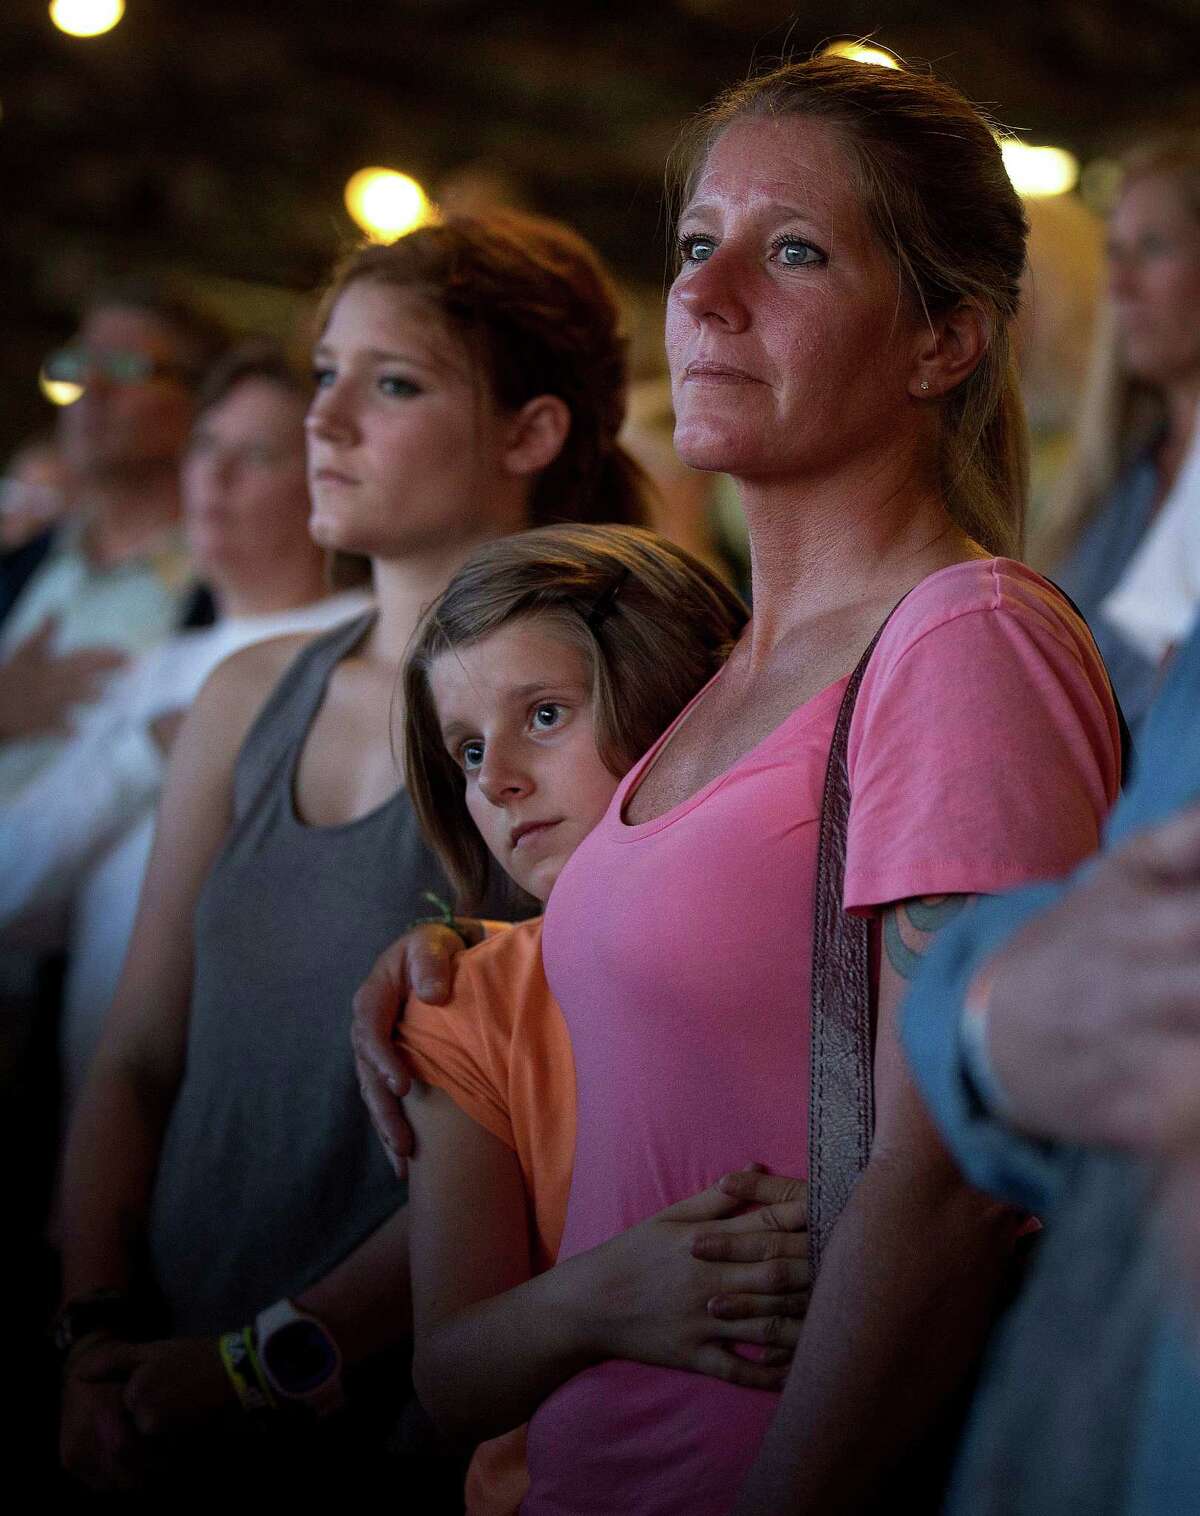 A woman stands with her family as a prayer is said over the loudspeakers at the Prescott Frontier Days Rodeo, Wednesday, July 3, 2013 in Prescott, Ariz., for the 19 Granite Mountain Hotshot firefighters who were killed Sunday near Yarnell, Ariz. (AP Photo/Julie Jacobson)